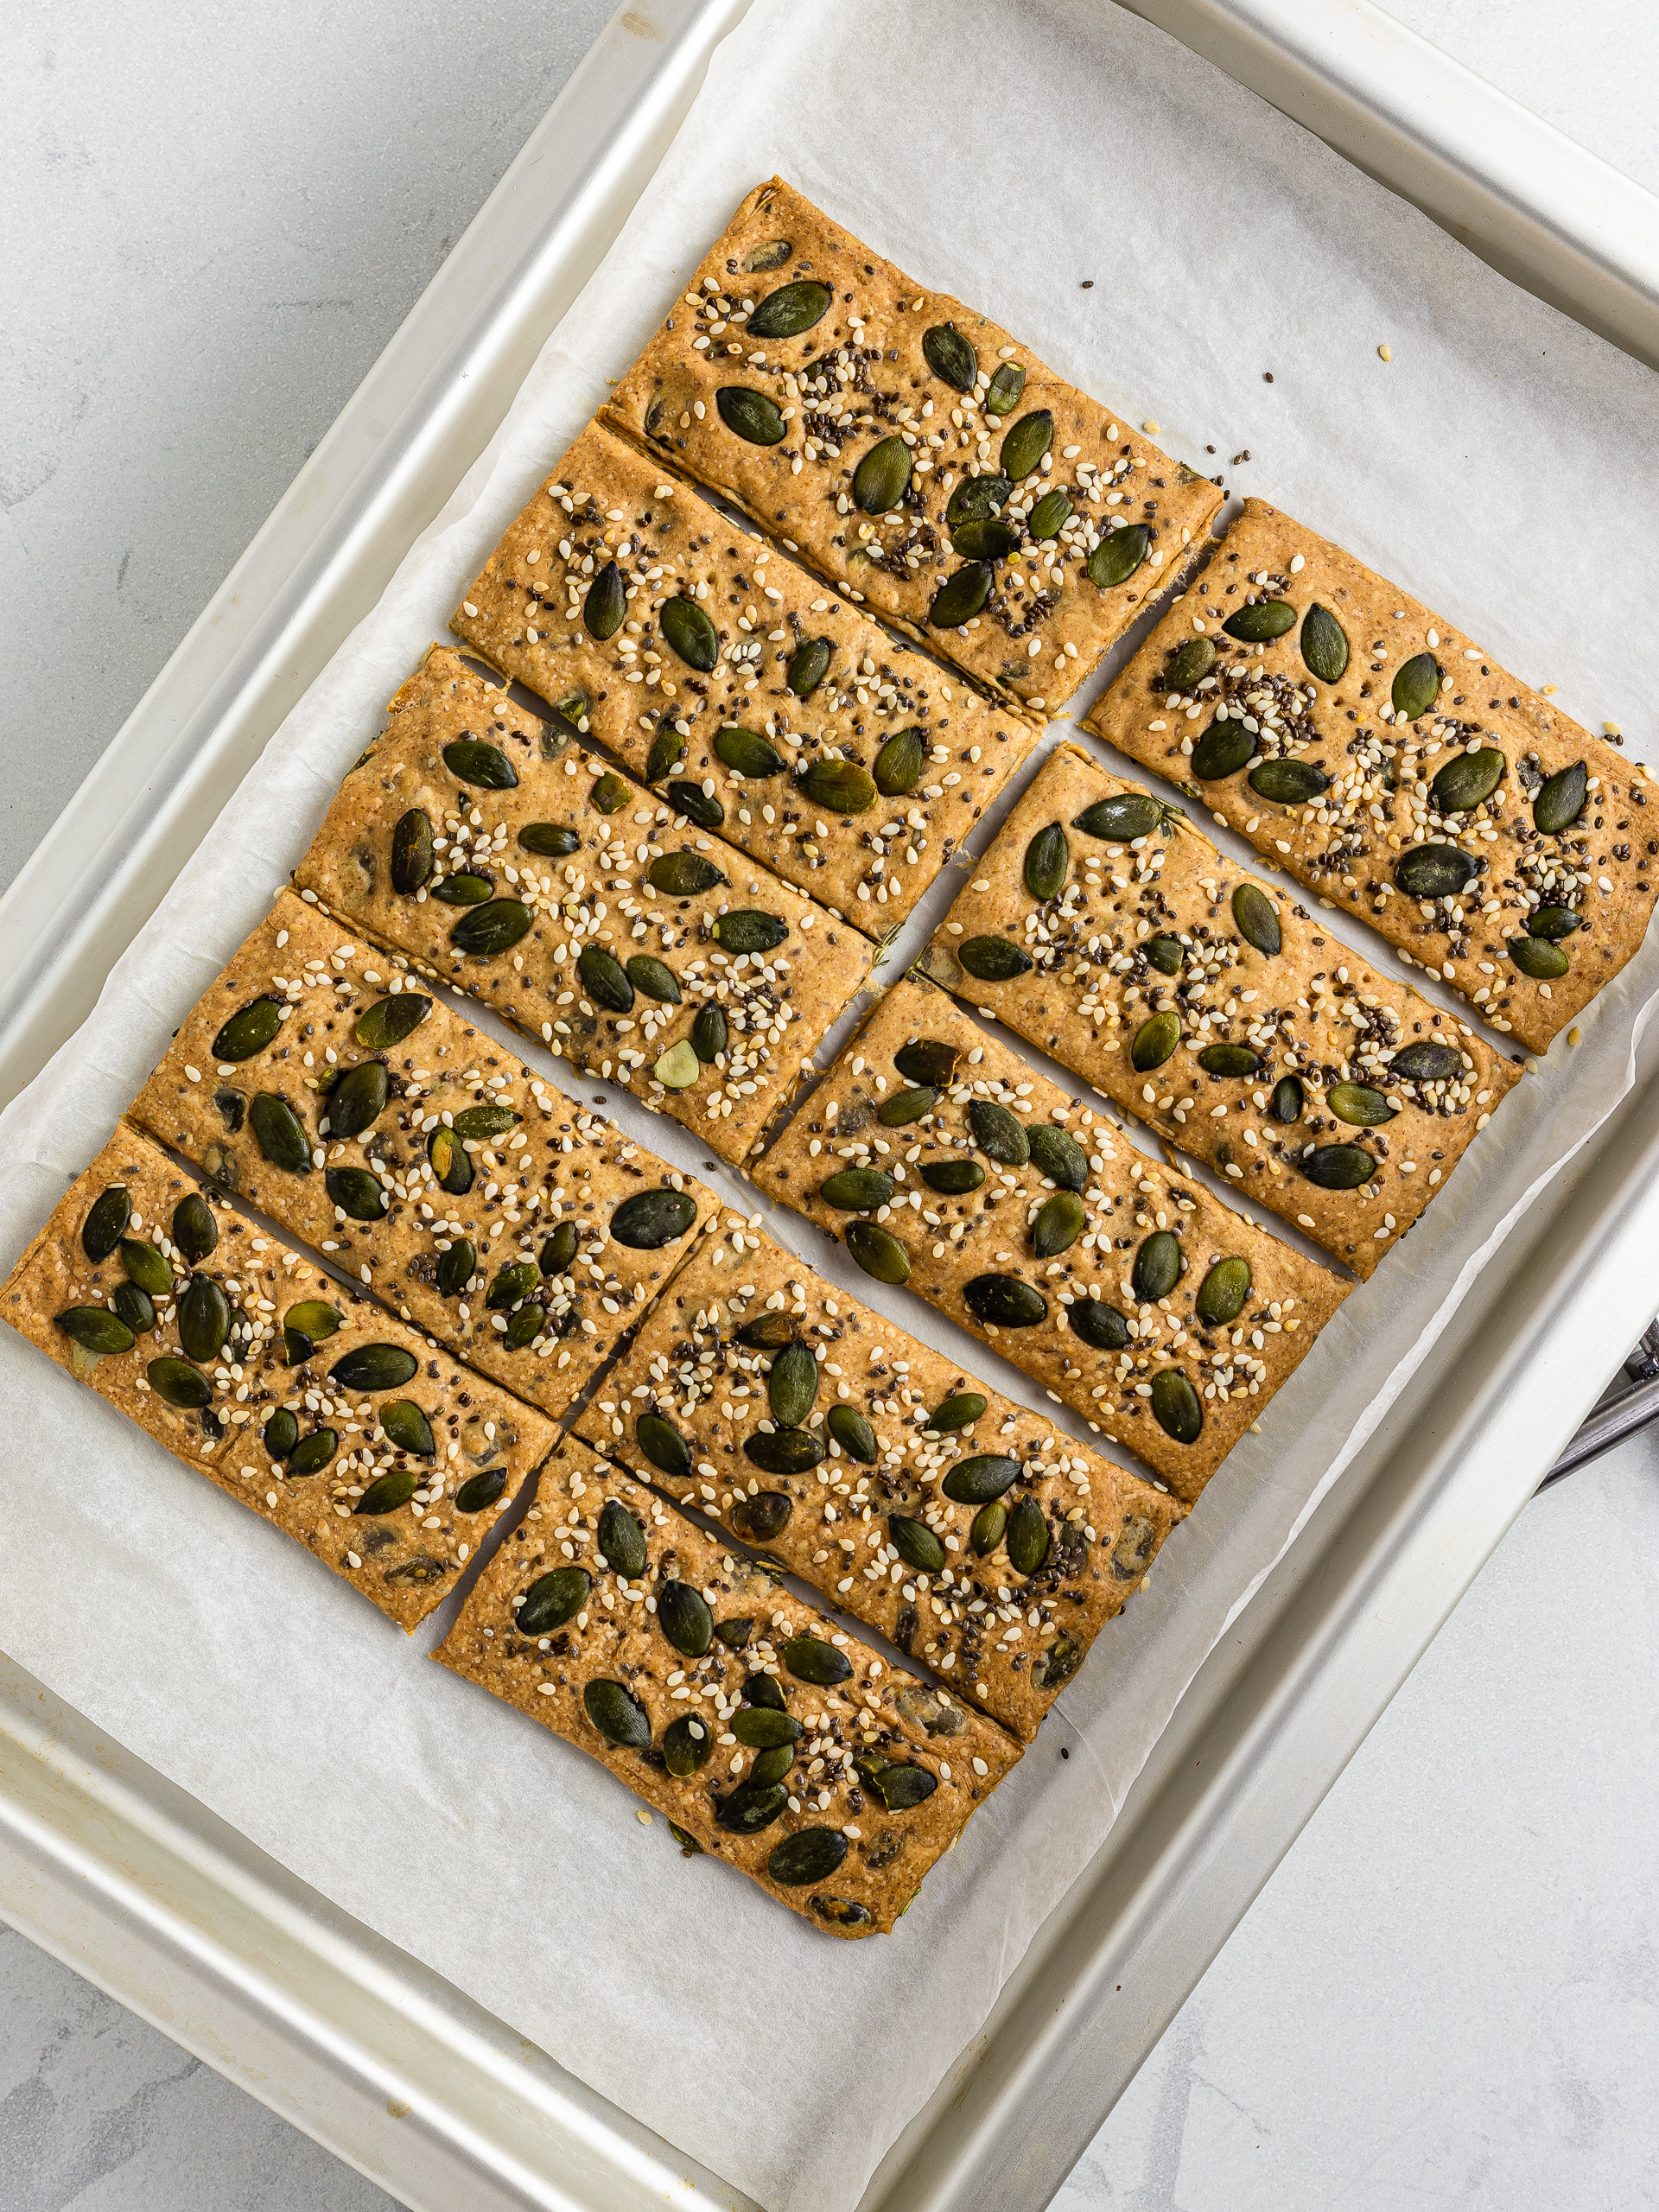 oven-baked spelt crackers on a baking tray